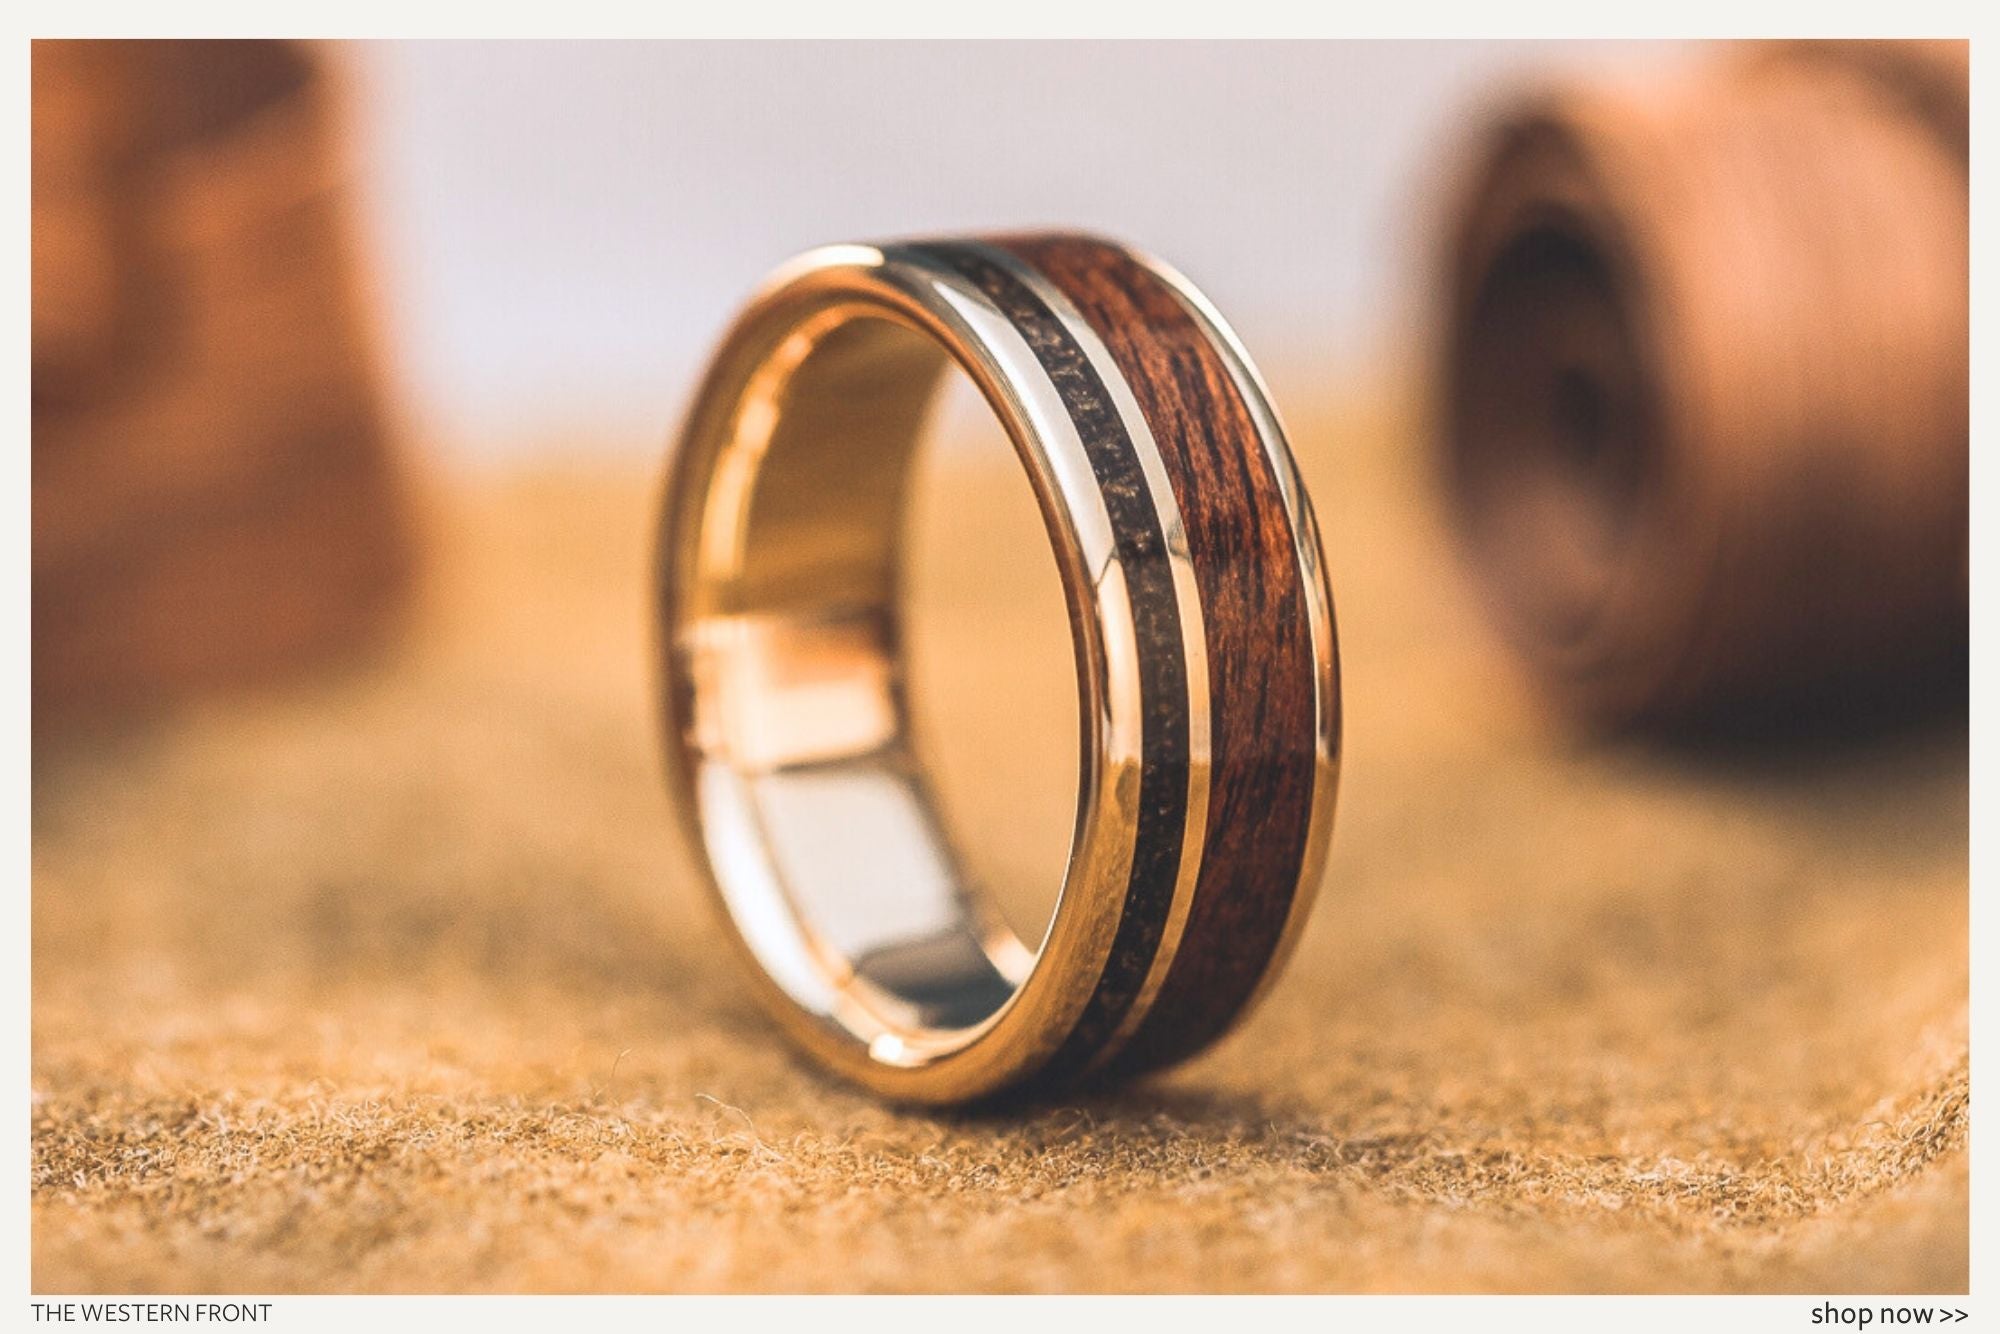 our-favorite-rugged-rustic-wedding-bands-for-him-the-western-front-mens-gold-wedding-band-1903-springfield-rifle-stock-wood-wwi-uniform-rustic-and-main